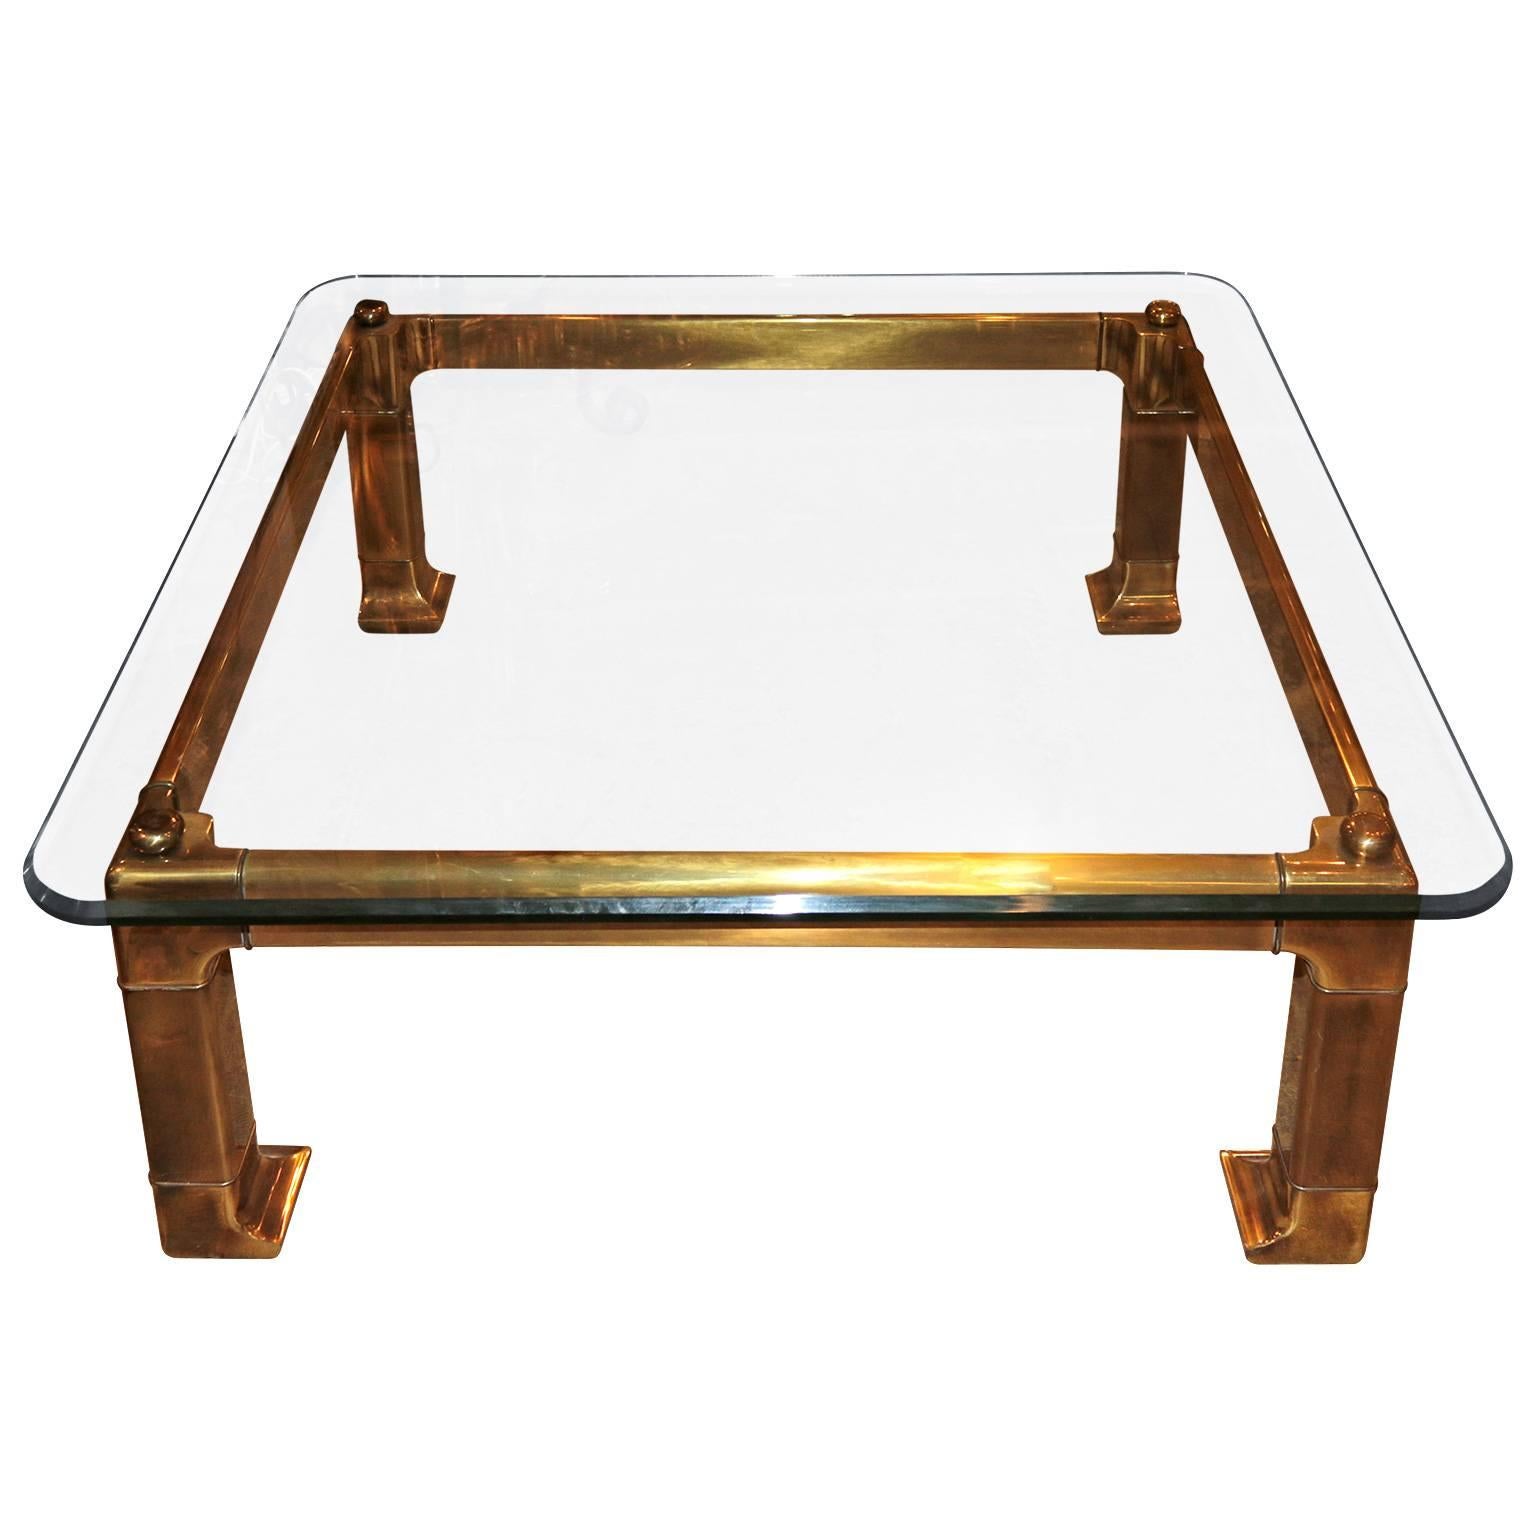 Stunning and beautiful brass coffee table designed and manufactured by Mastercraft.

The glass is original hand cut double thick beveled glass. Amazing condition.